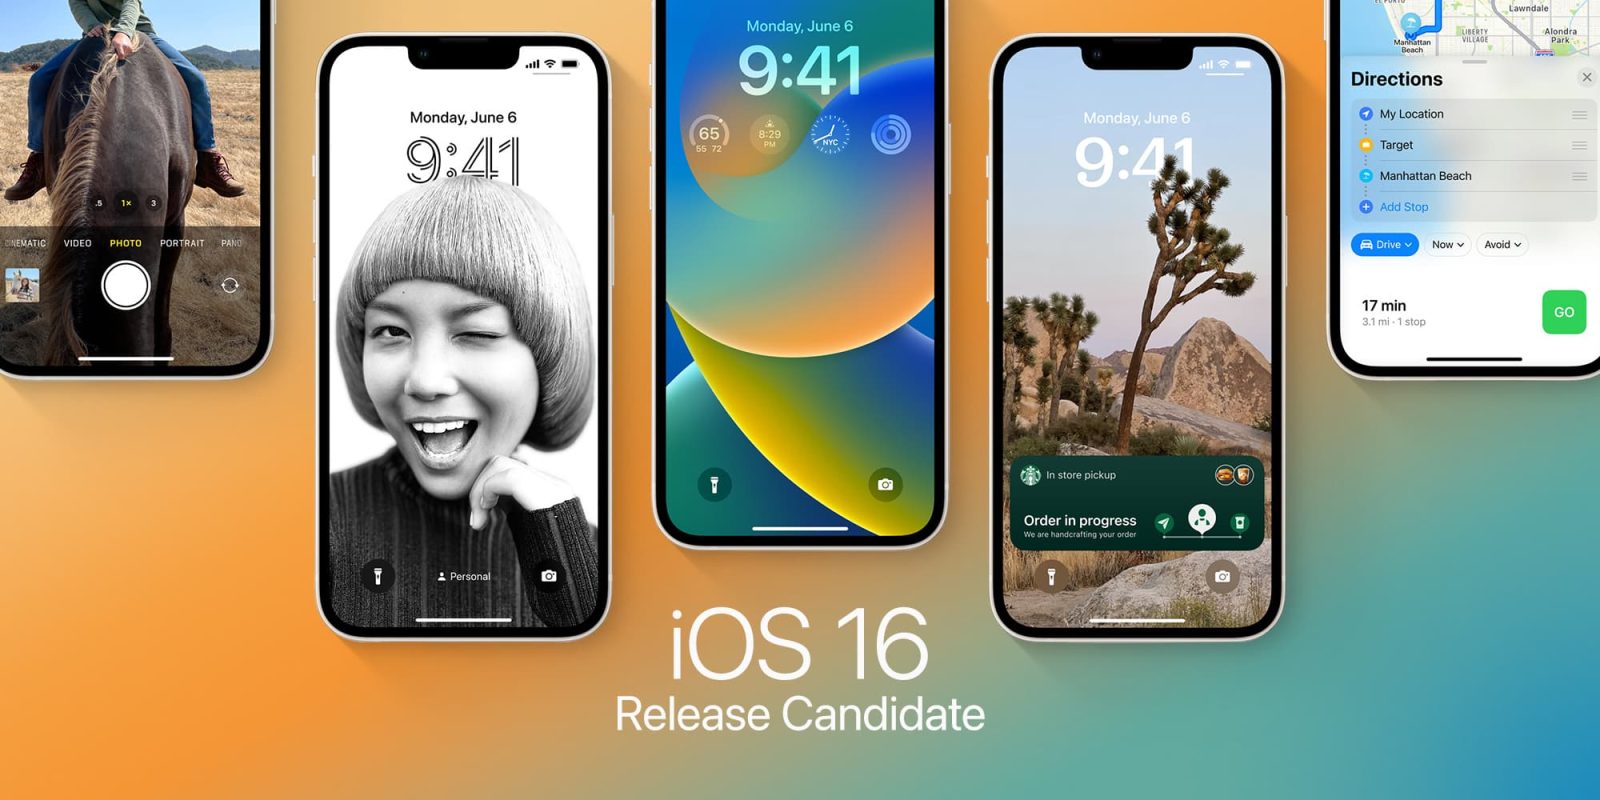 iOS 16 Release Candidate